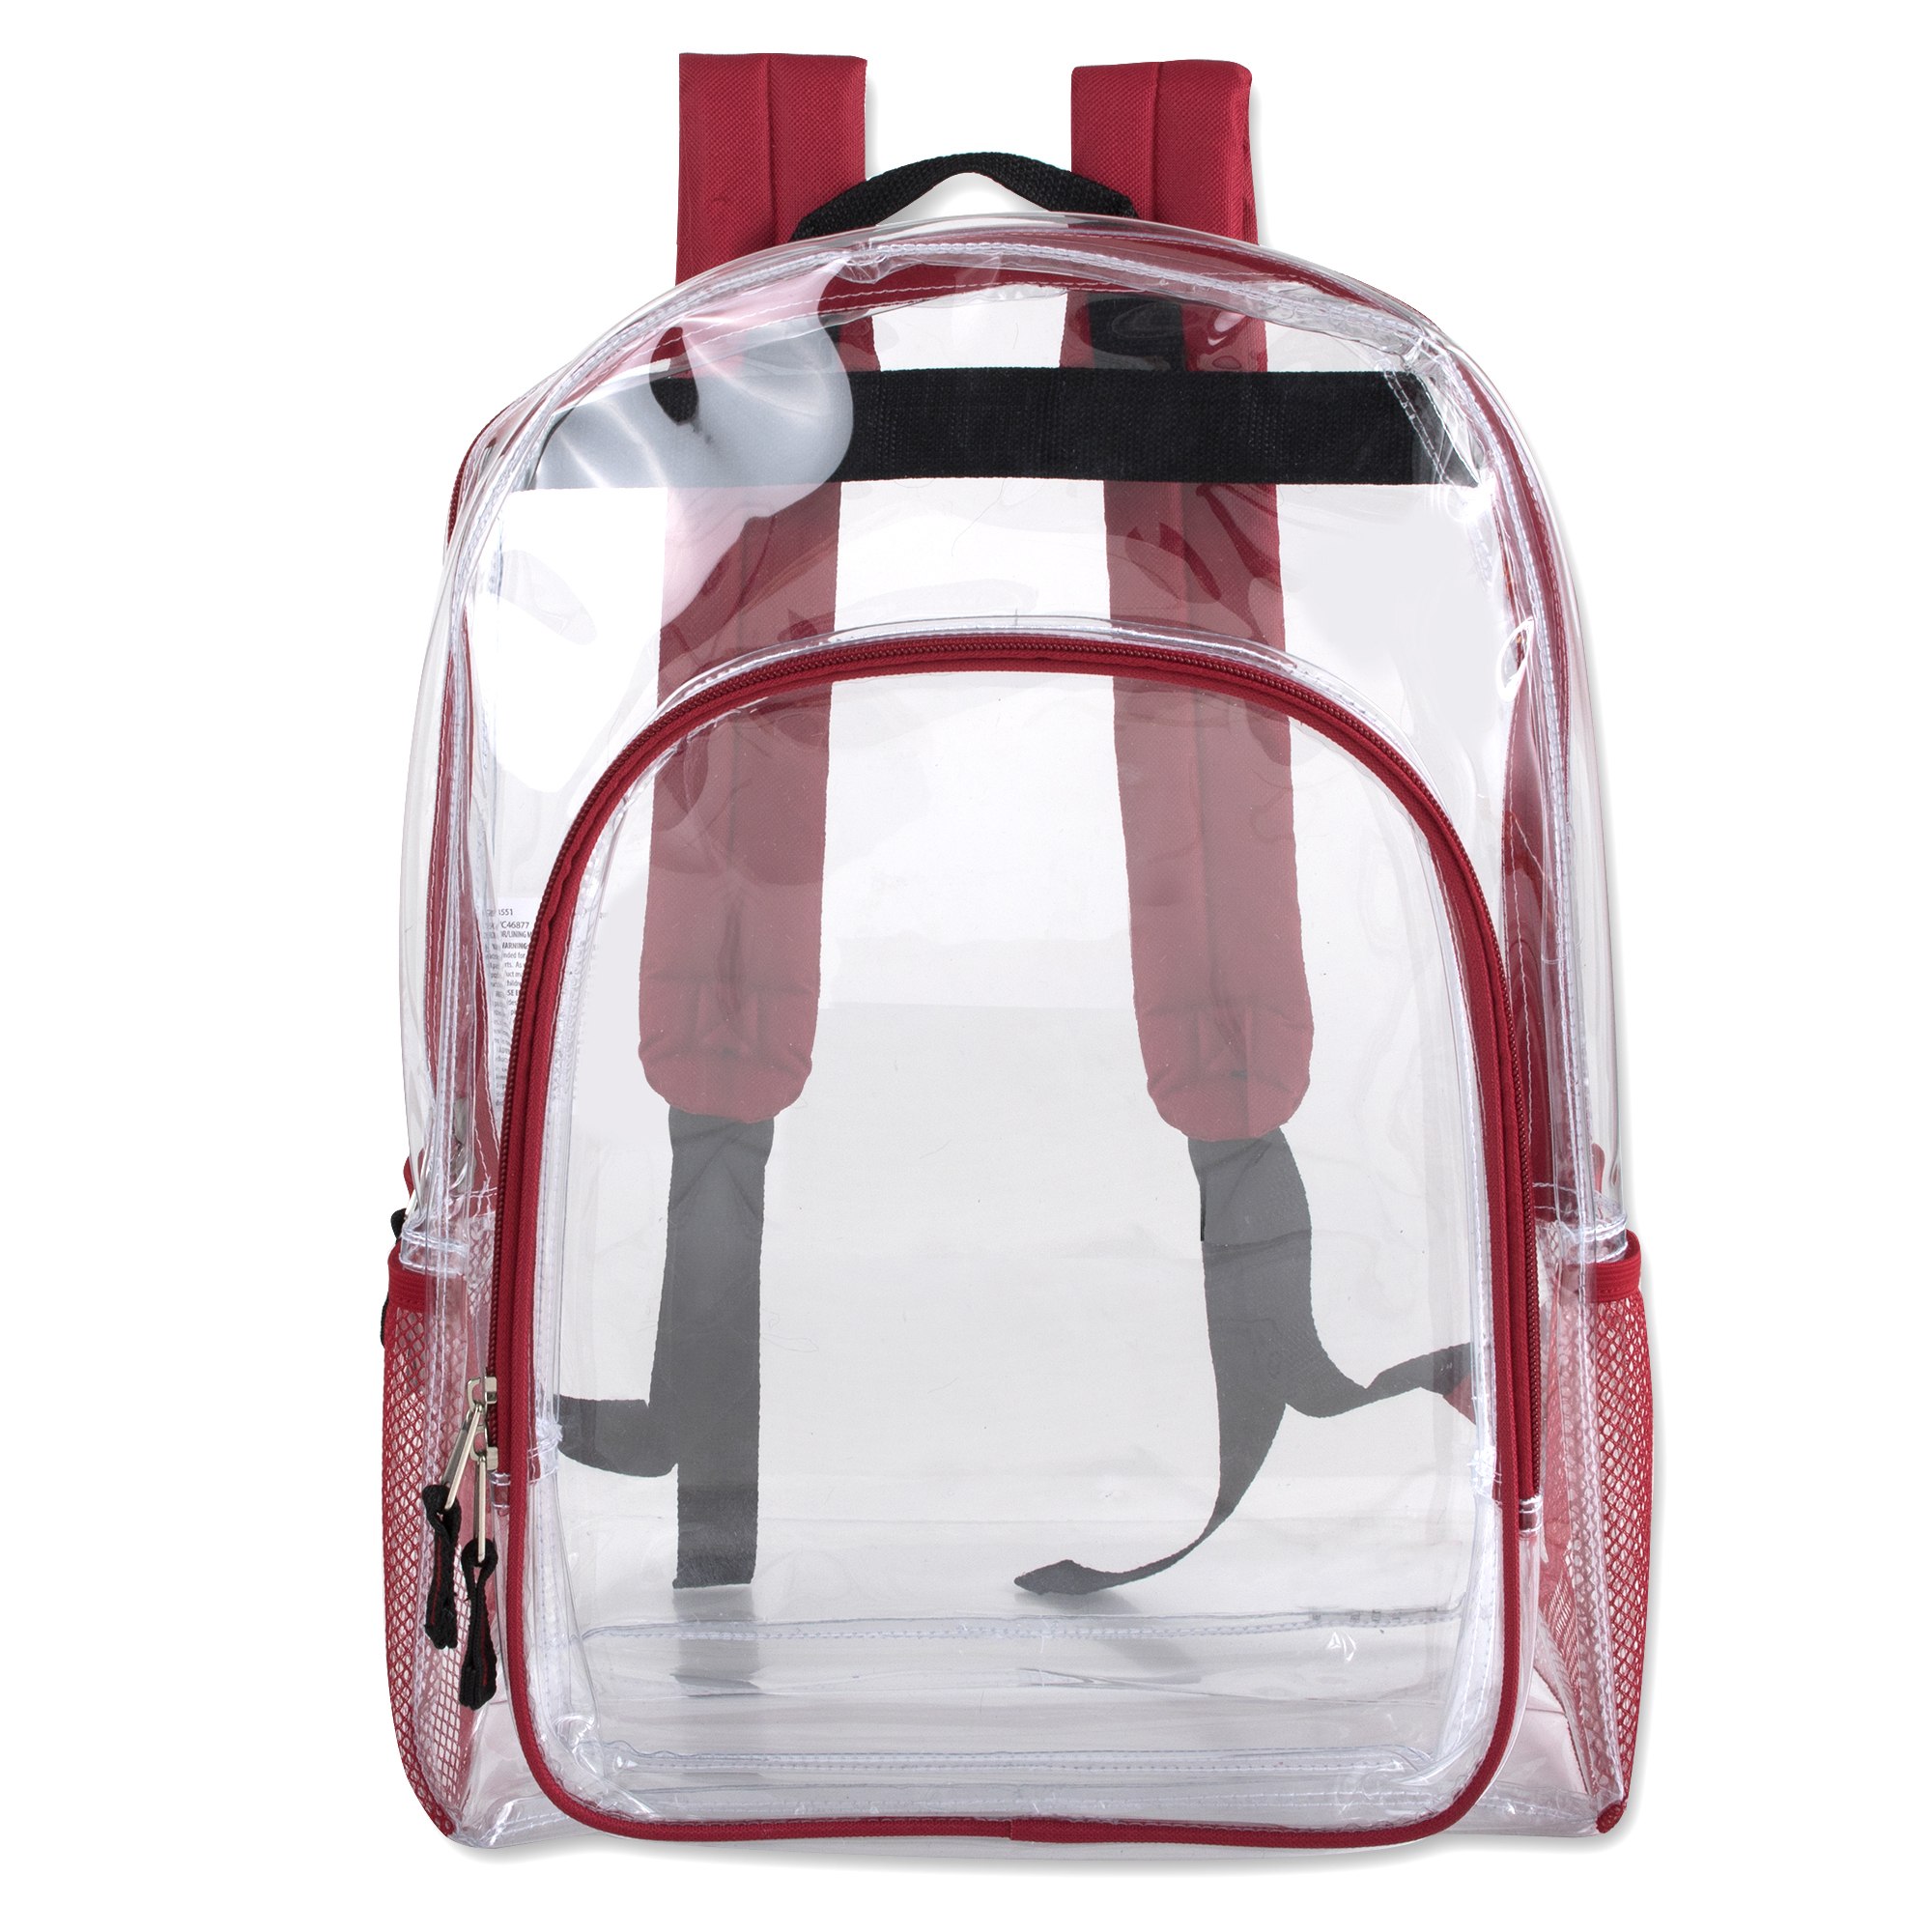 Trailmaker Carrying Case (Backpack), Red - image 4 of 6